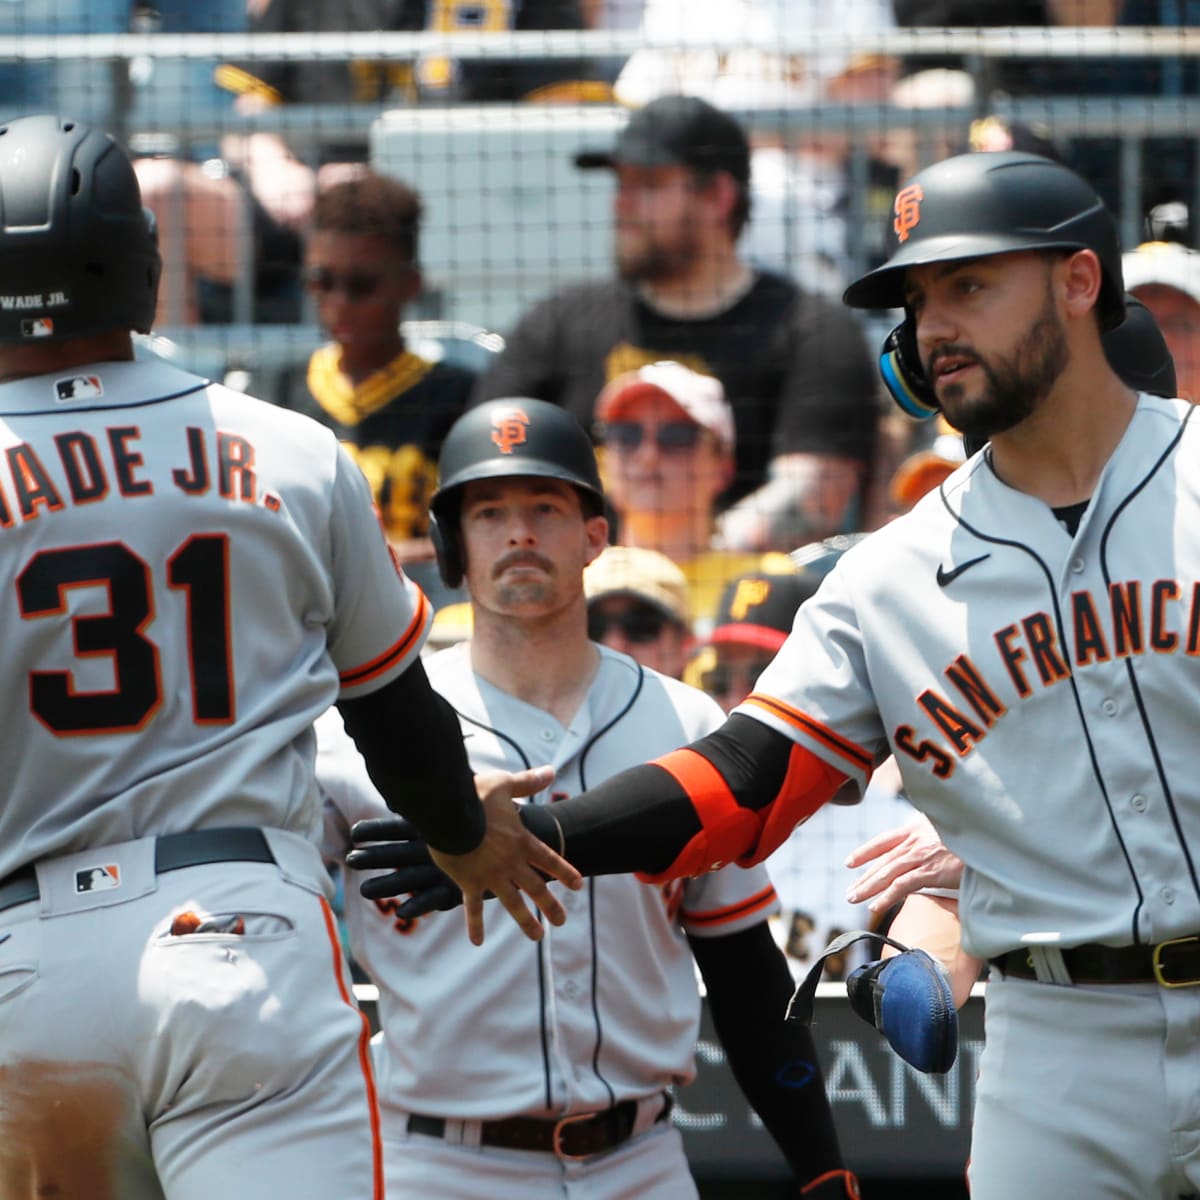 SF Giants sweep Pirates with five-run 10th inning in 8-4 win